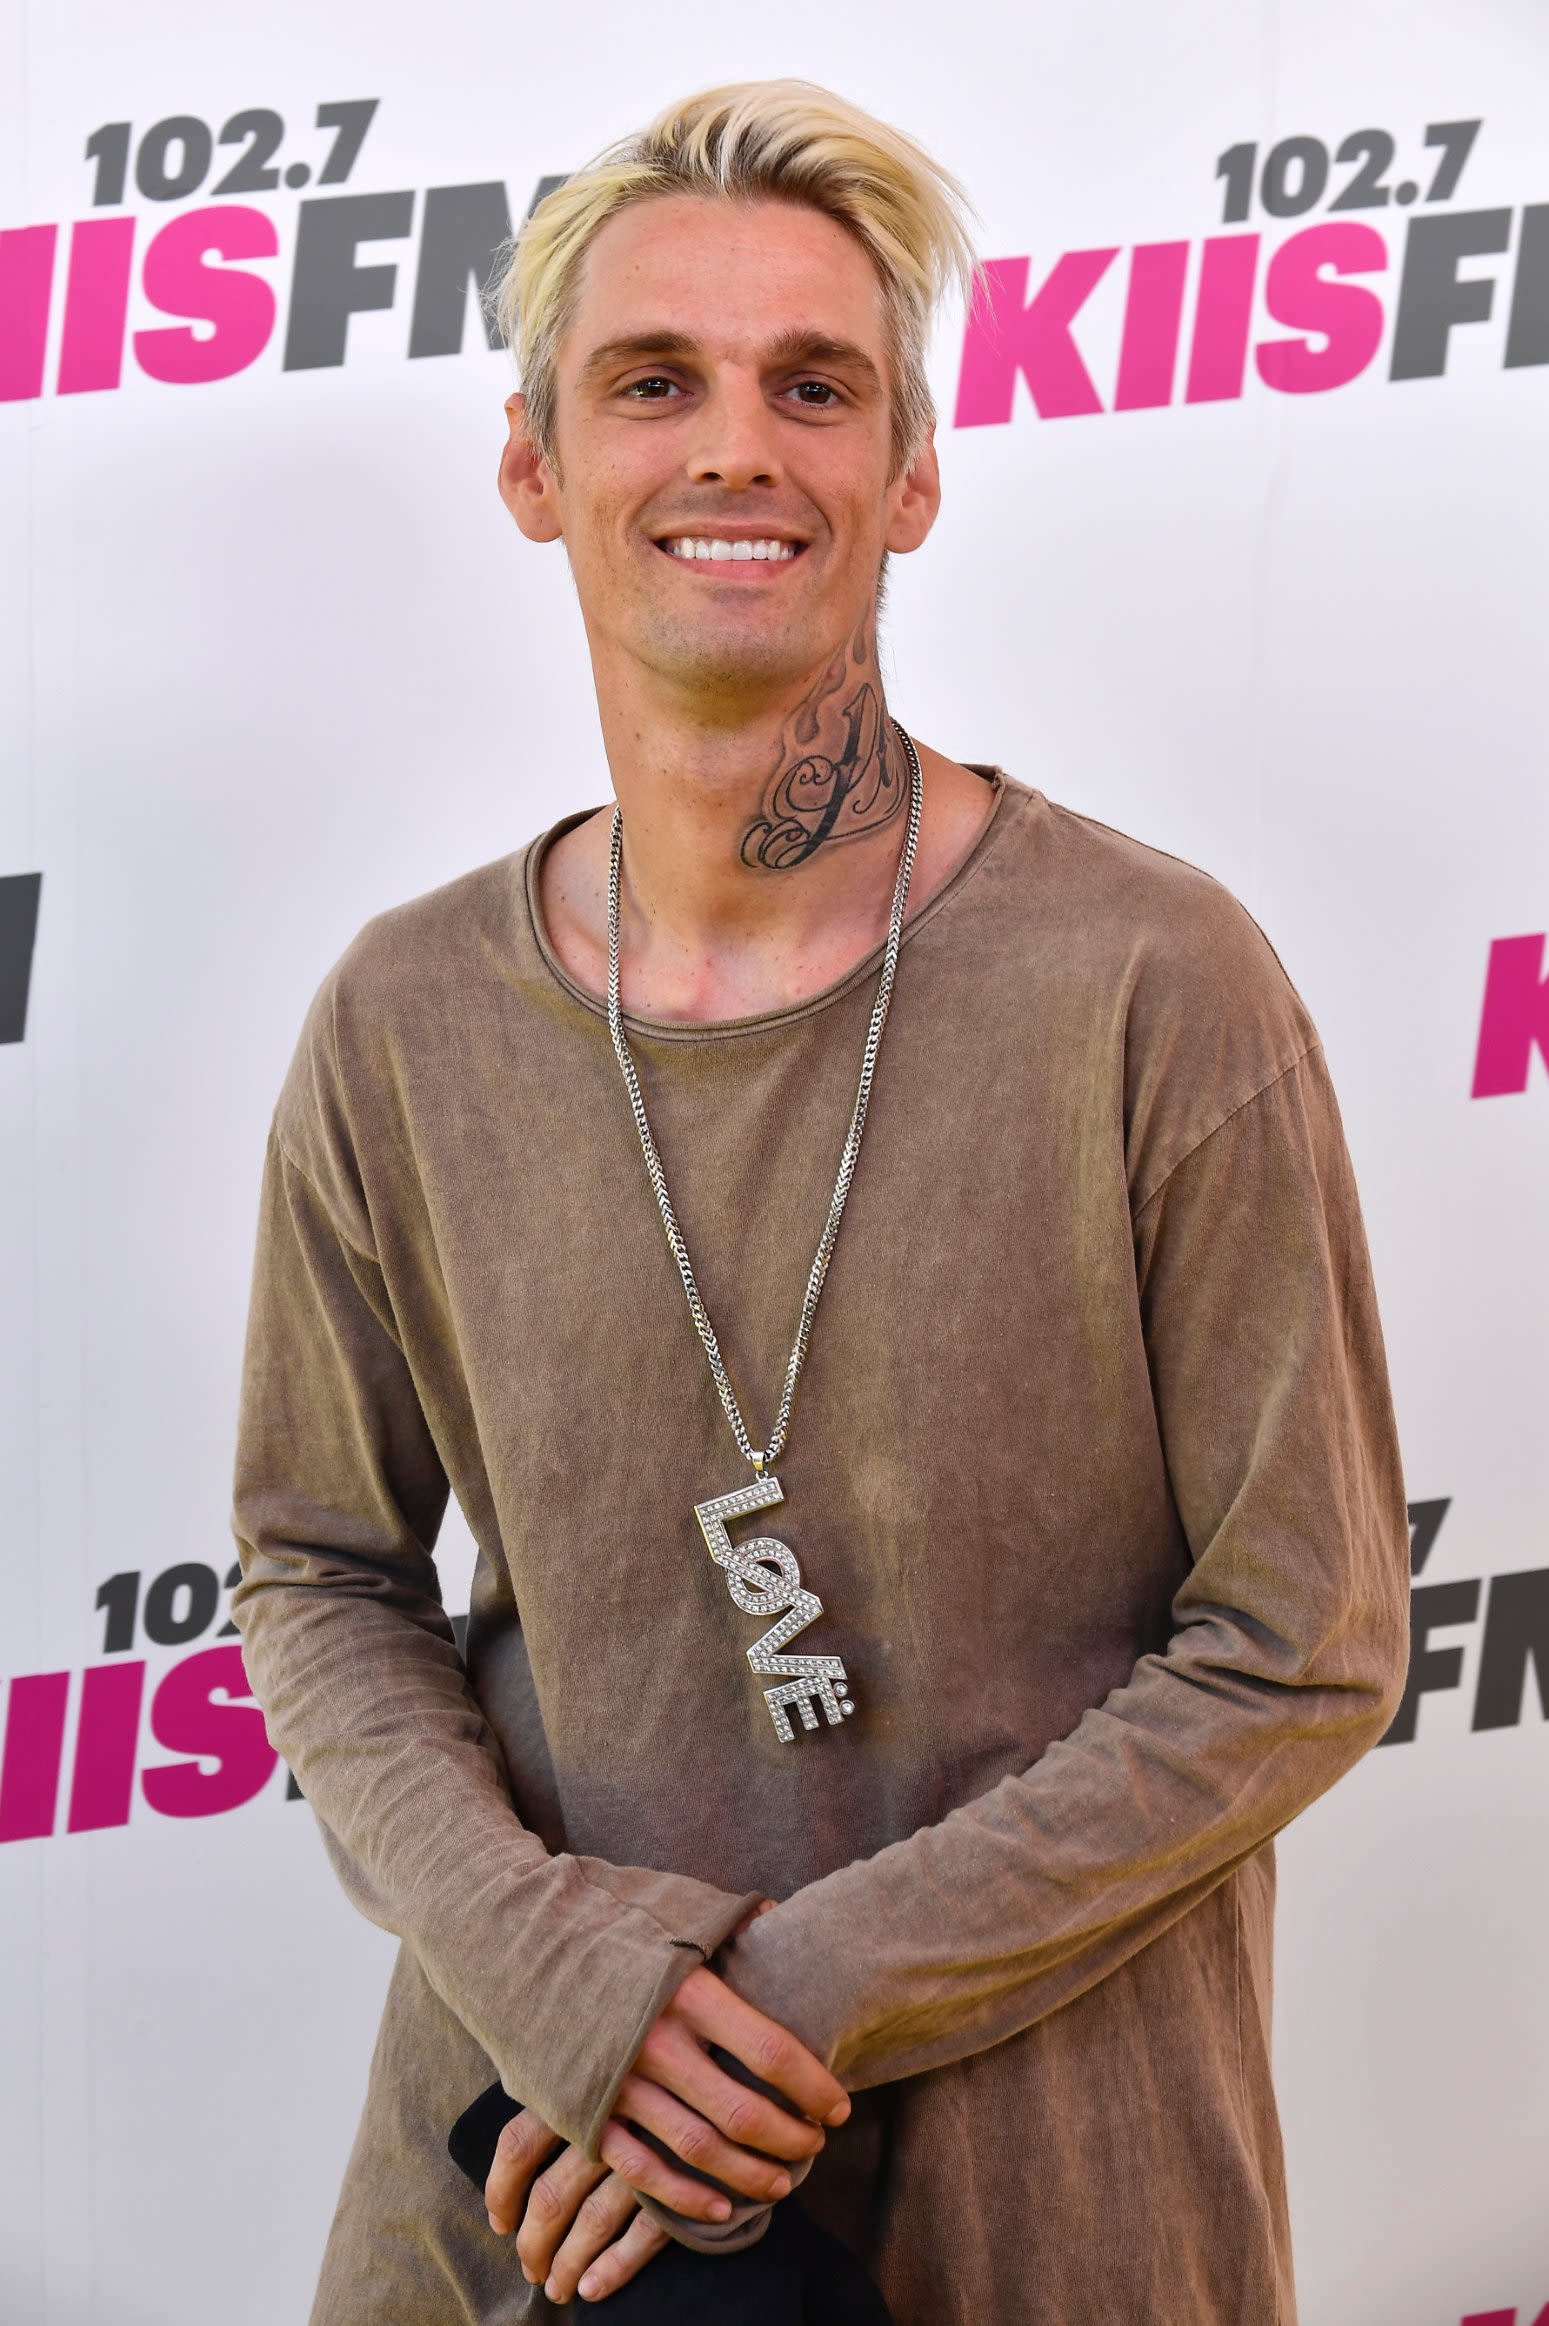 Boys To Gerls Sex New Hd Xxx Boys - Aaron Carter comes out as bisexual | CNN